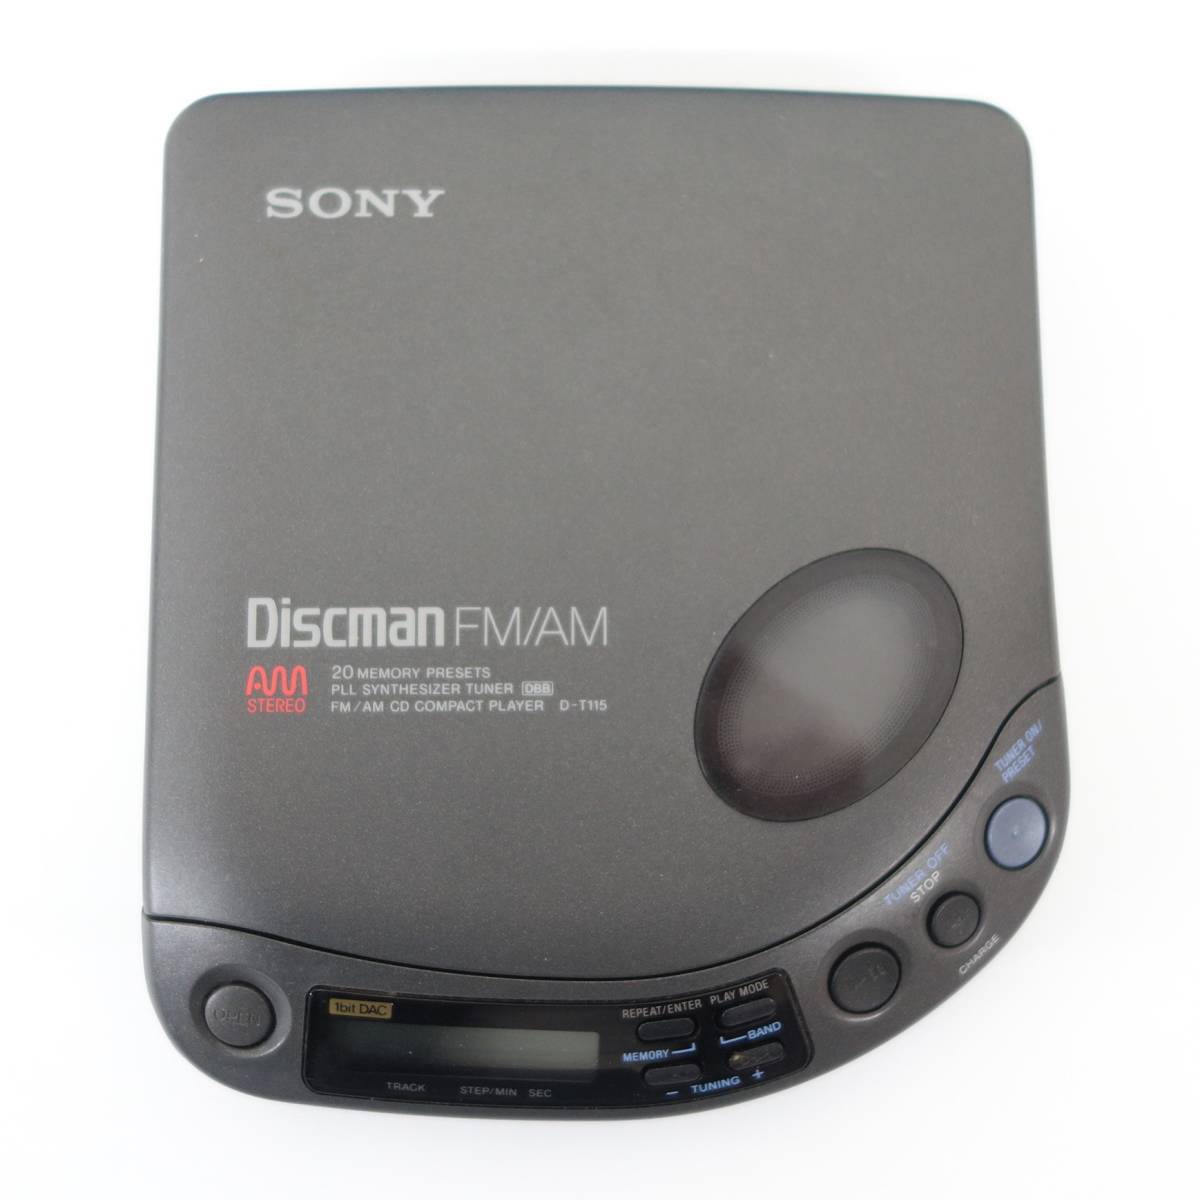  retro music that time thing *SONY Sony *Discman disk man *FM/AM with radio portable CD player *MODEL D-T115